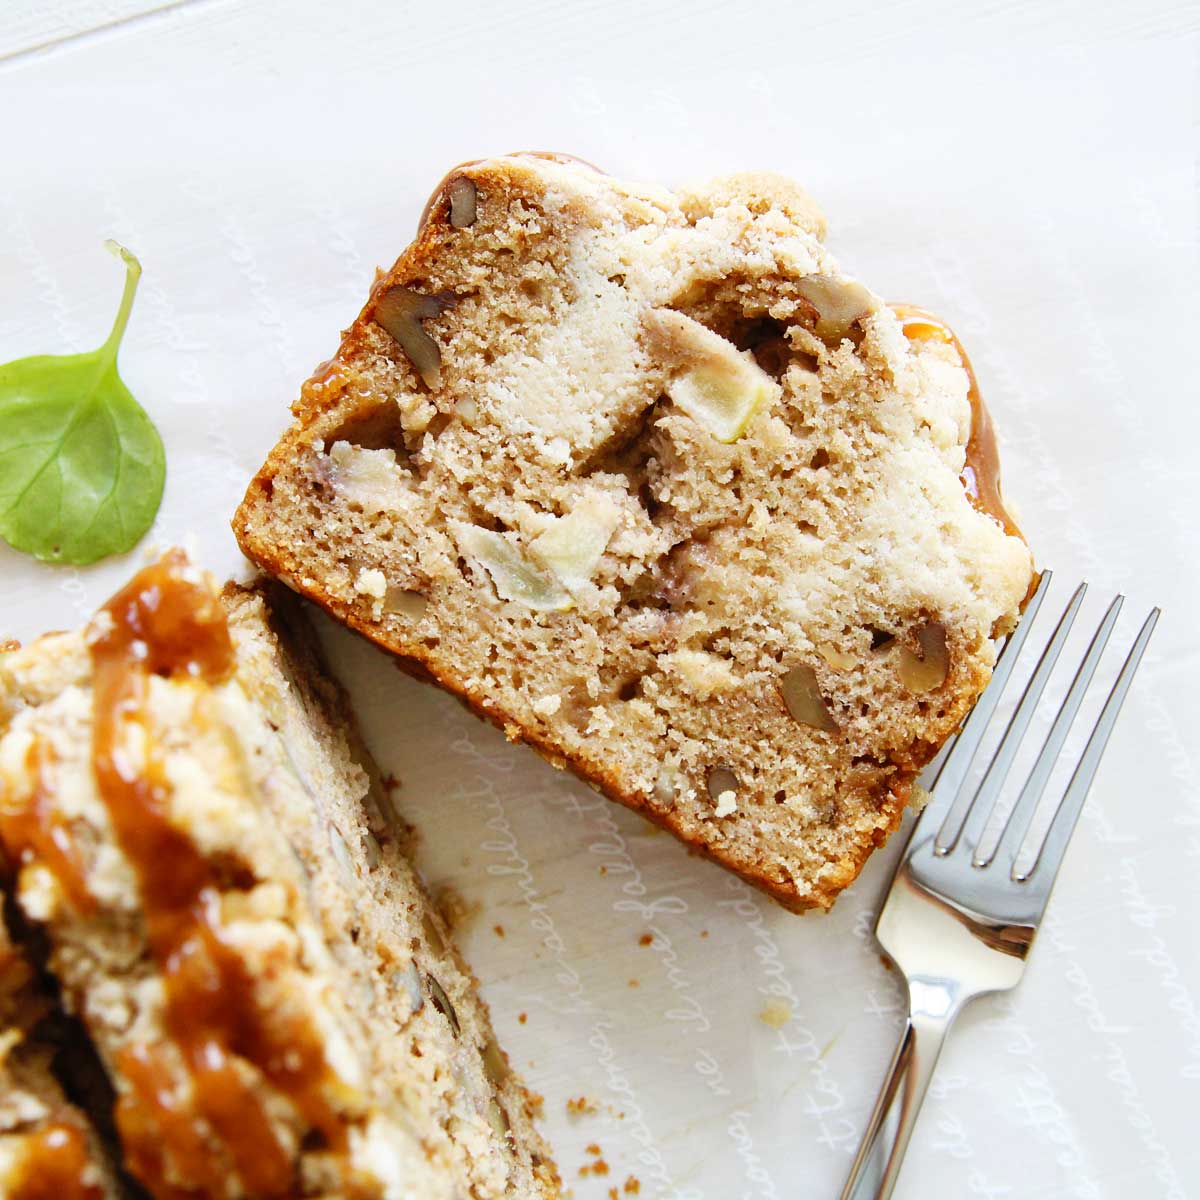 The Most Comforting Applesauce Banana Bread with Streusel Topping - Pumpkin Bread With Banana